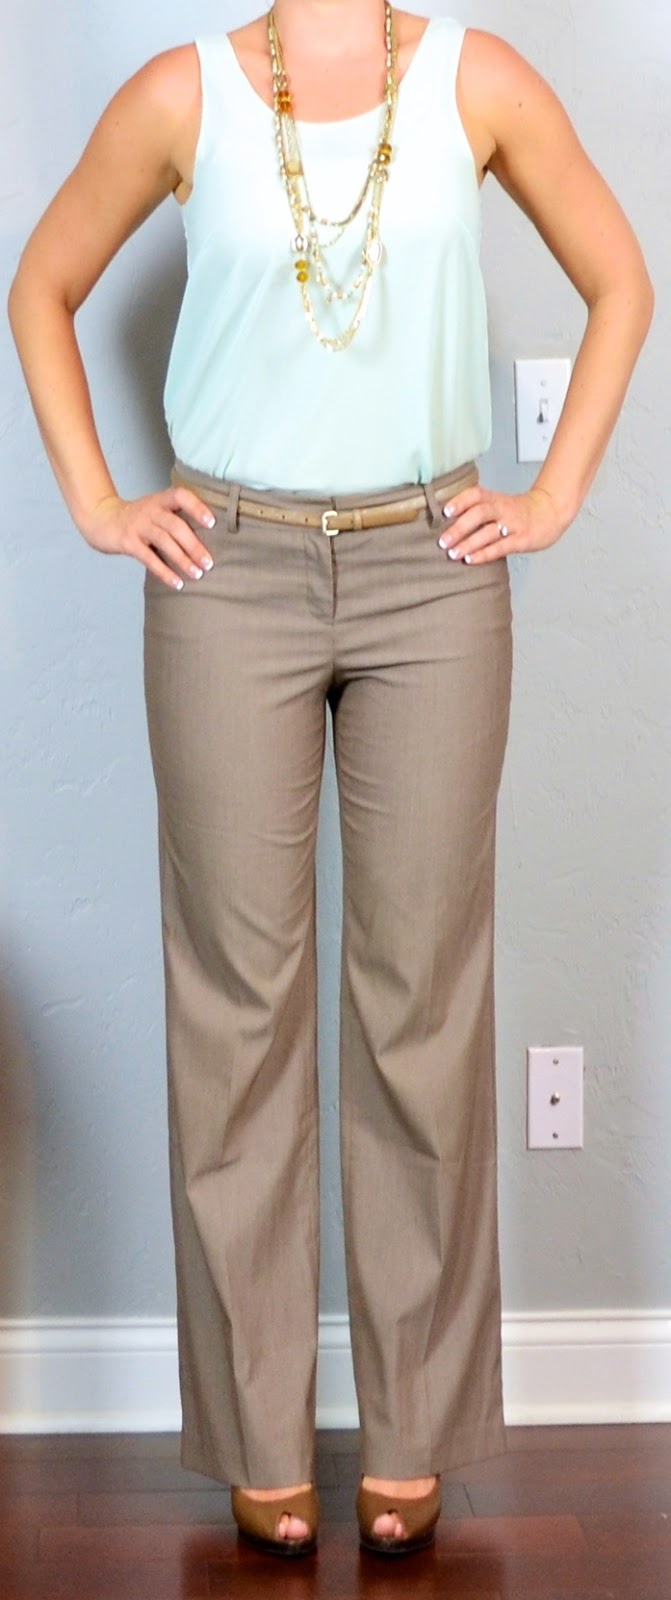 outfit post: mint tank, tan pants, brown peep-toed pumps | Outfit Posts